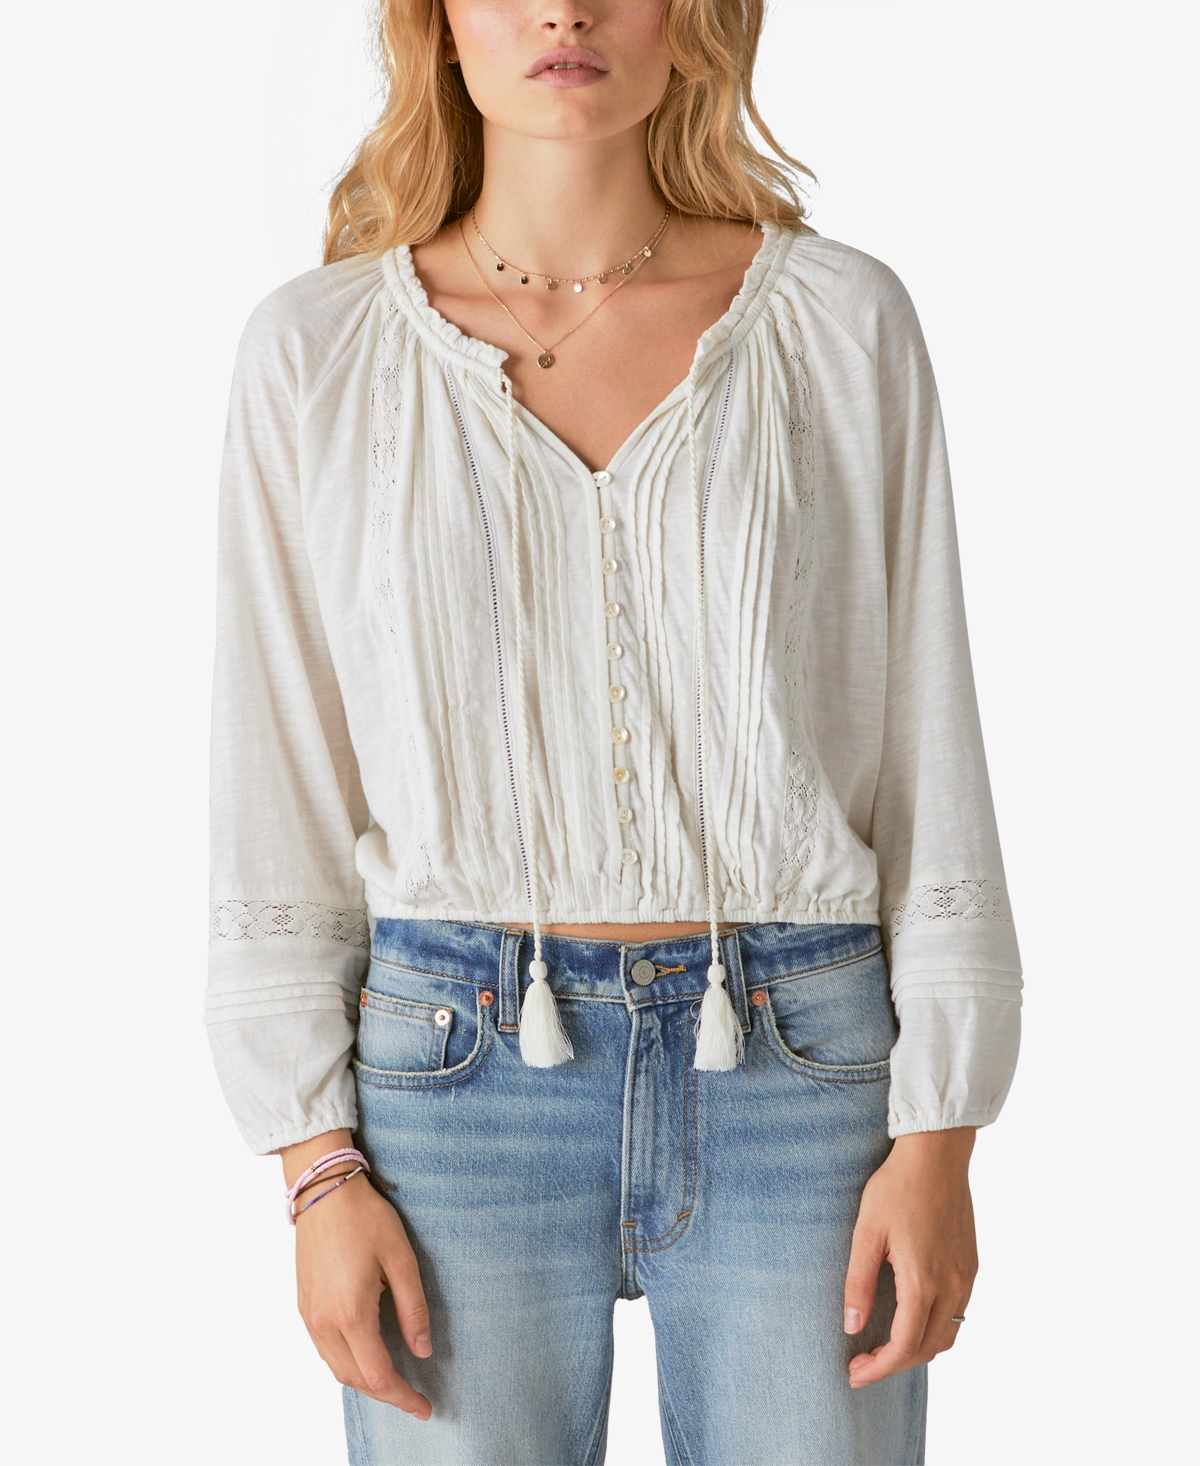 LUCKY BRAND WOMEN'S EMBROIDERED LACE-TRIMMED ELASTIC-HEM PEASANT TOP